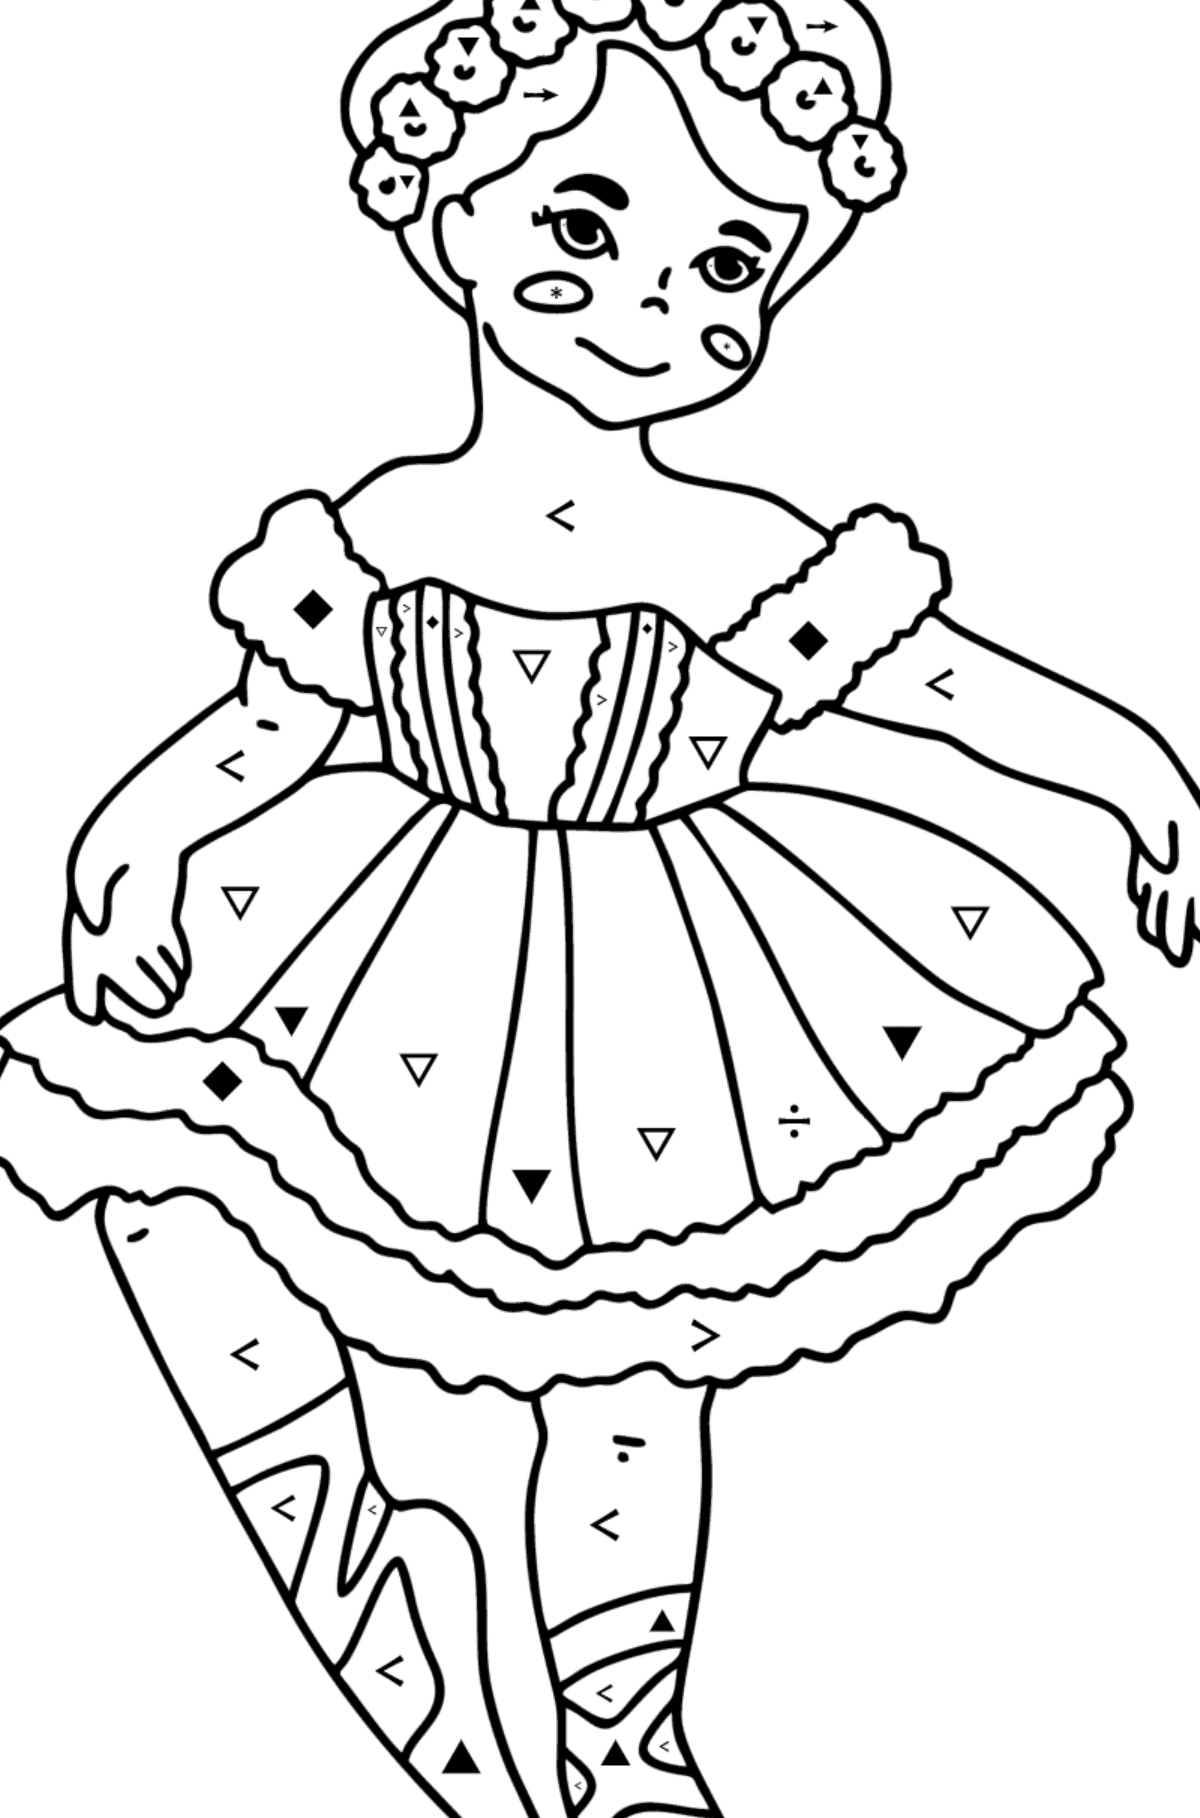 Ballerina girl сoloring page - Coloring by Symbols for Kids